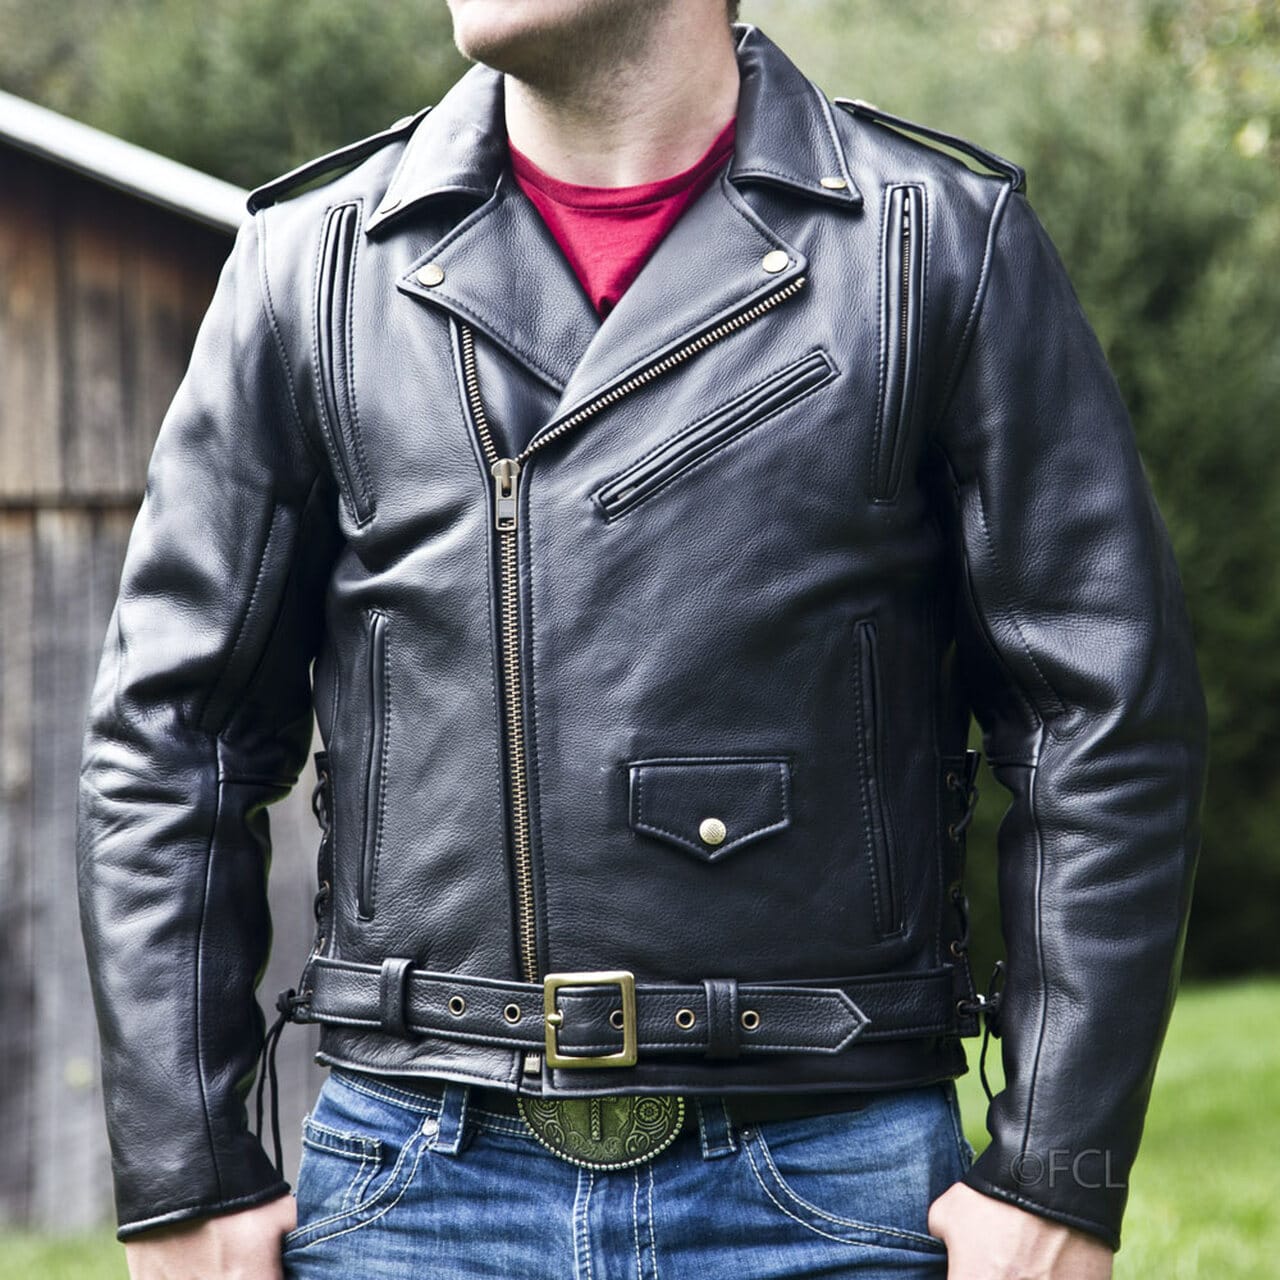 Motorcycle jacket with zippers